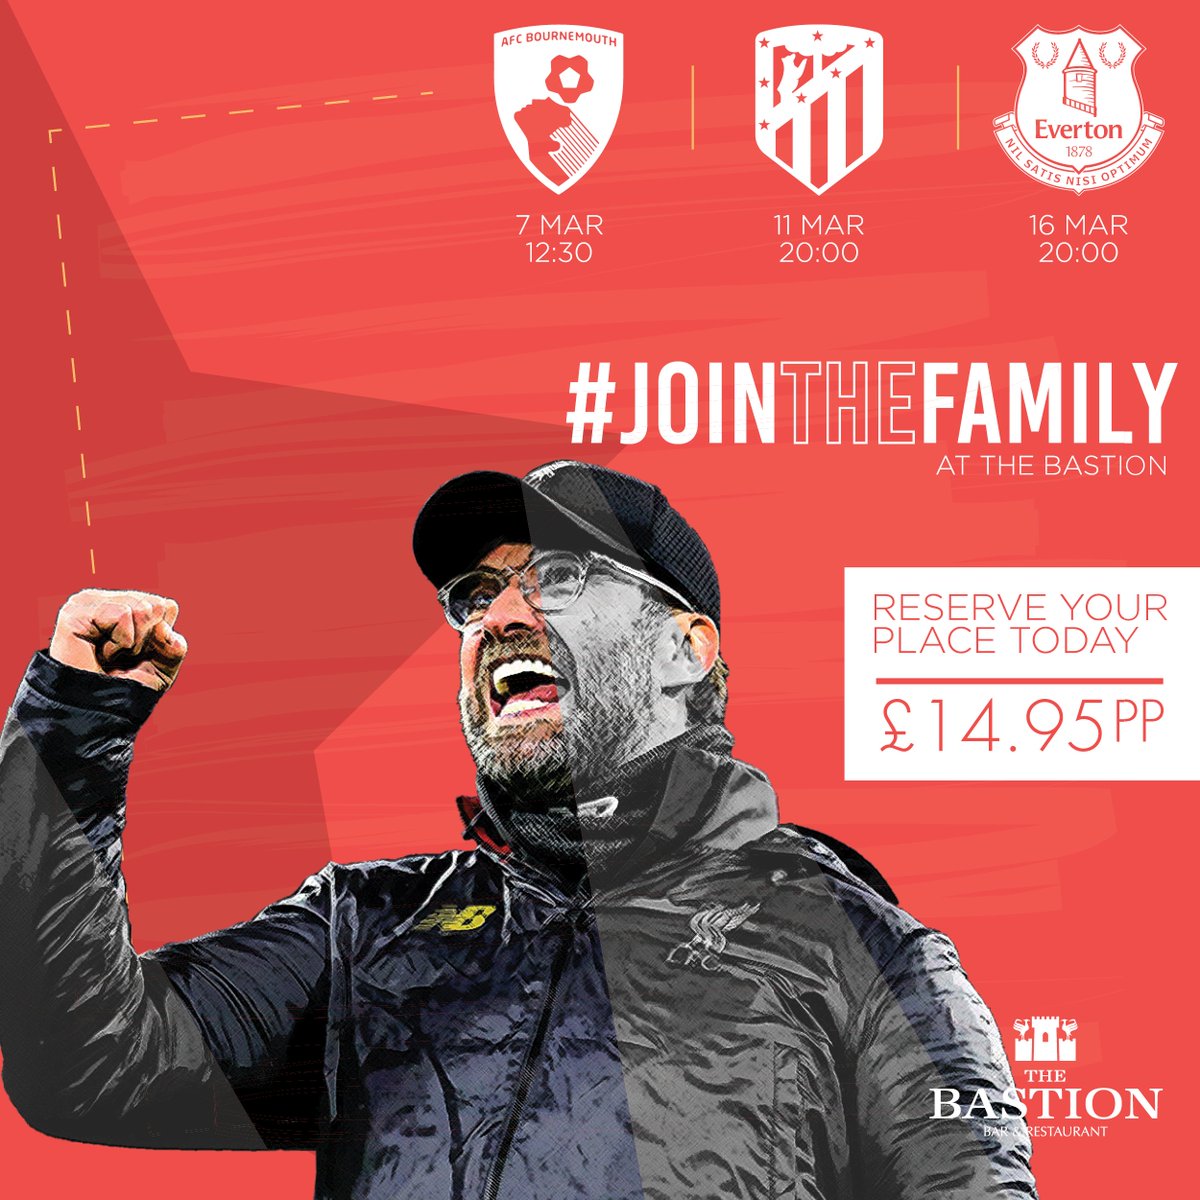 ⚽ Liverpool vs Everton – Monday 16th March – 20:00KO. ⚽ Will the Reds be one step closer to the PL title Monday as they take on Everton in the 236th Merseyside Derby at Goodison Park? Join us & be part of our Match Day Exp. - £14.95pp! 🙌 ☎ 0151 541 9092 ☎